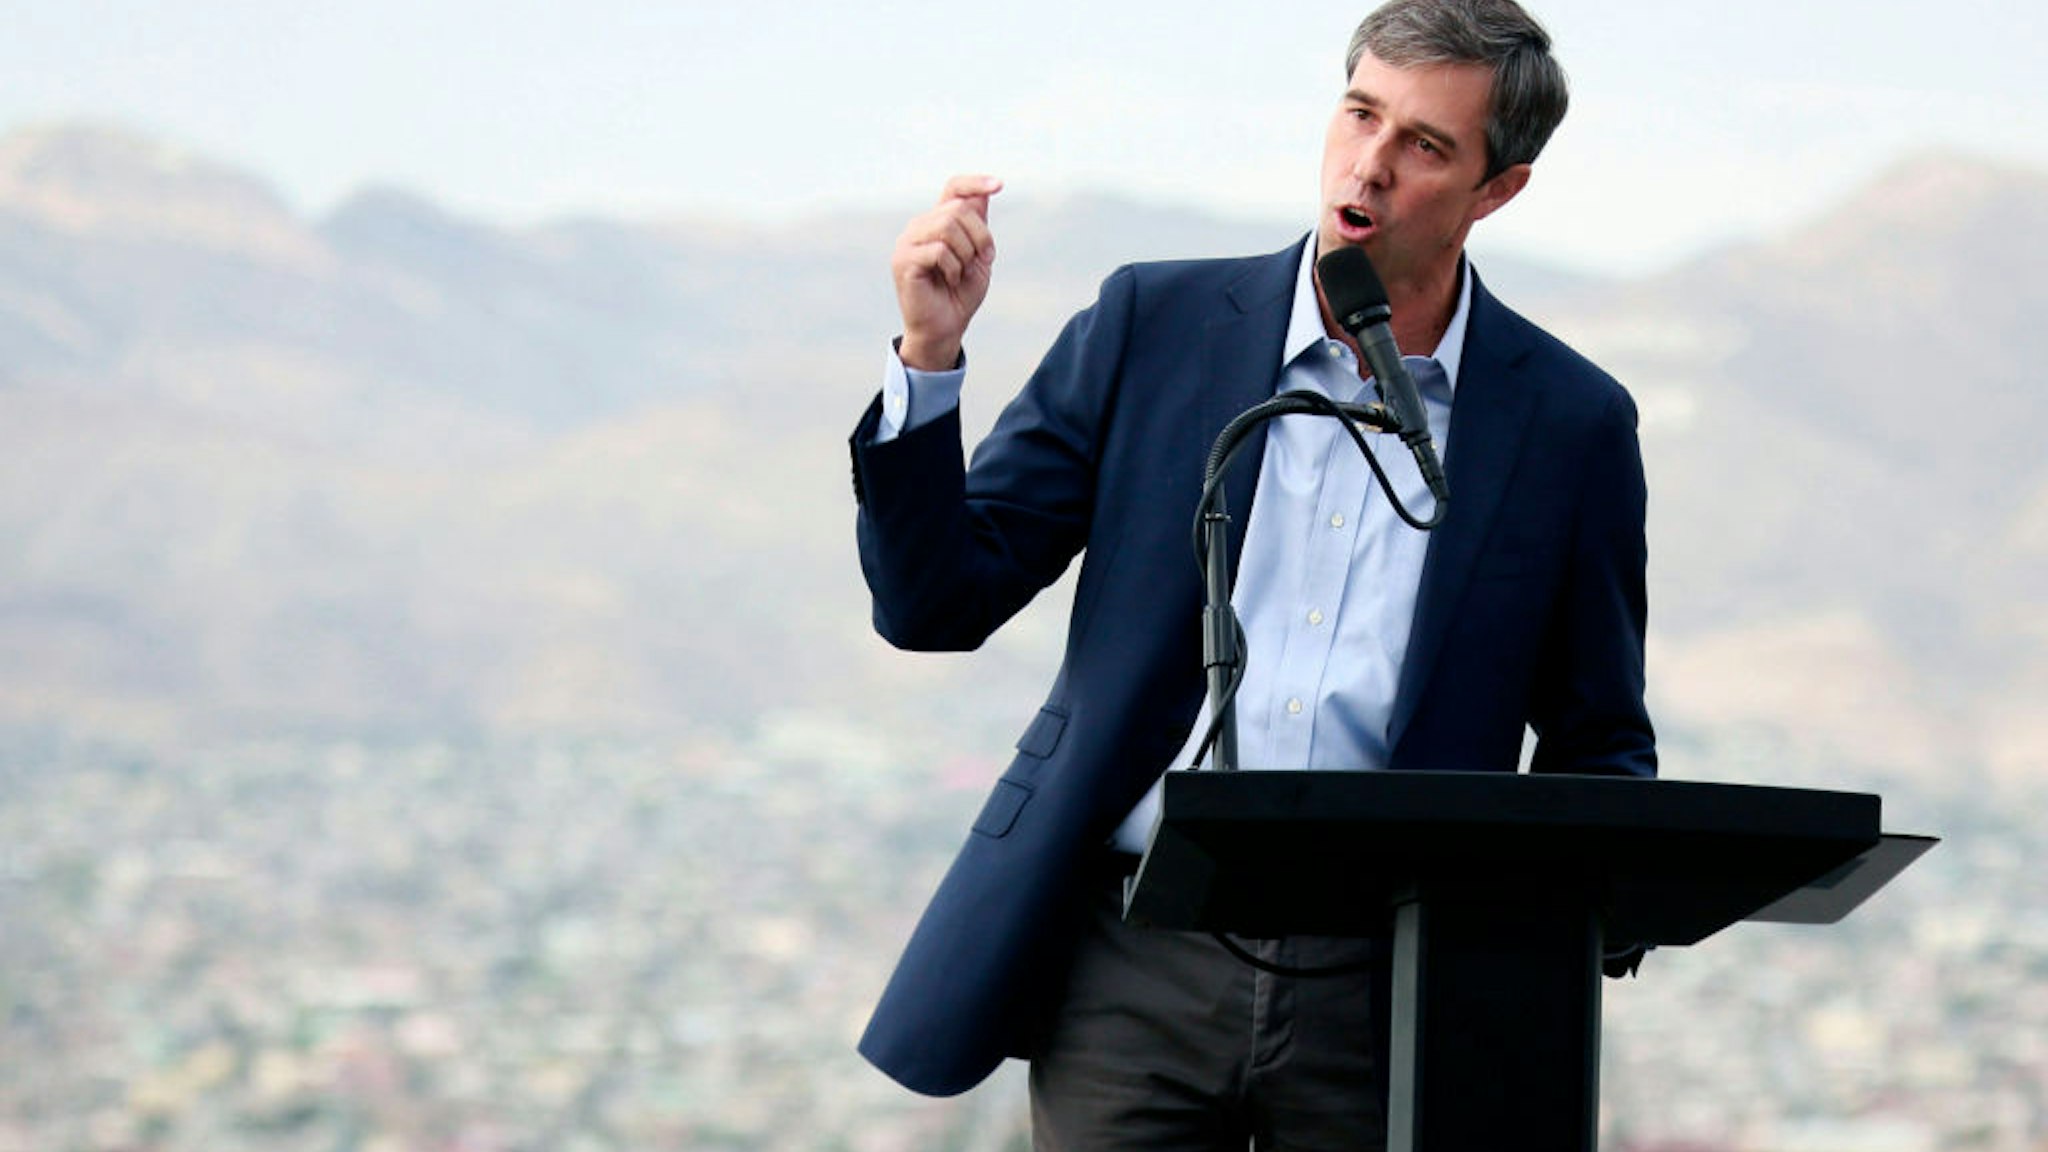 Democratic Presidential Candidate Beto O'Rourke Gives Campaign Address In His Hometown Town Of El Paso, Texas